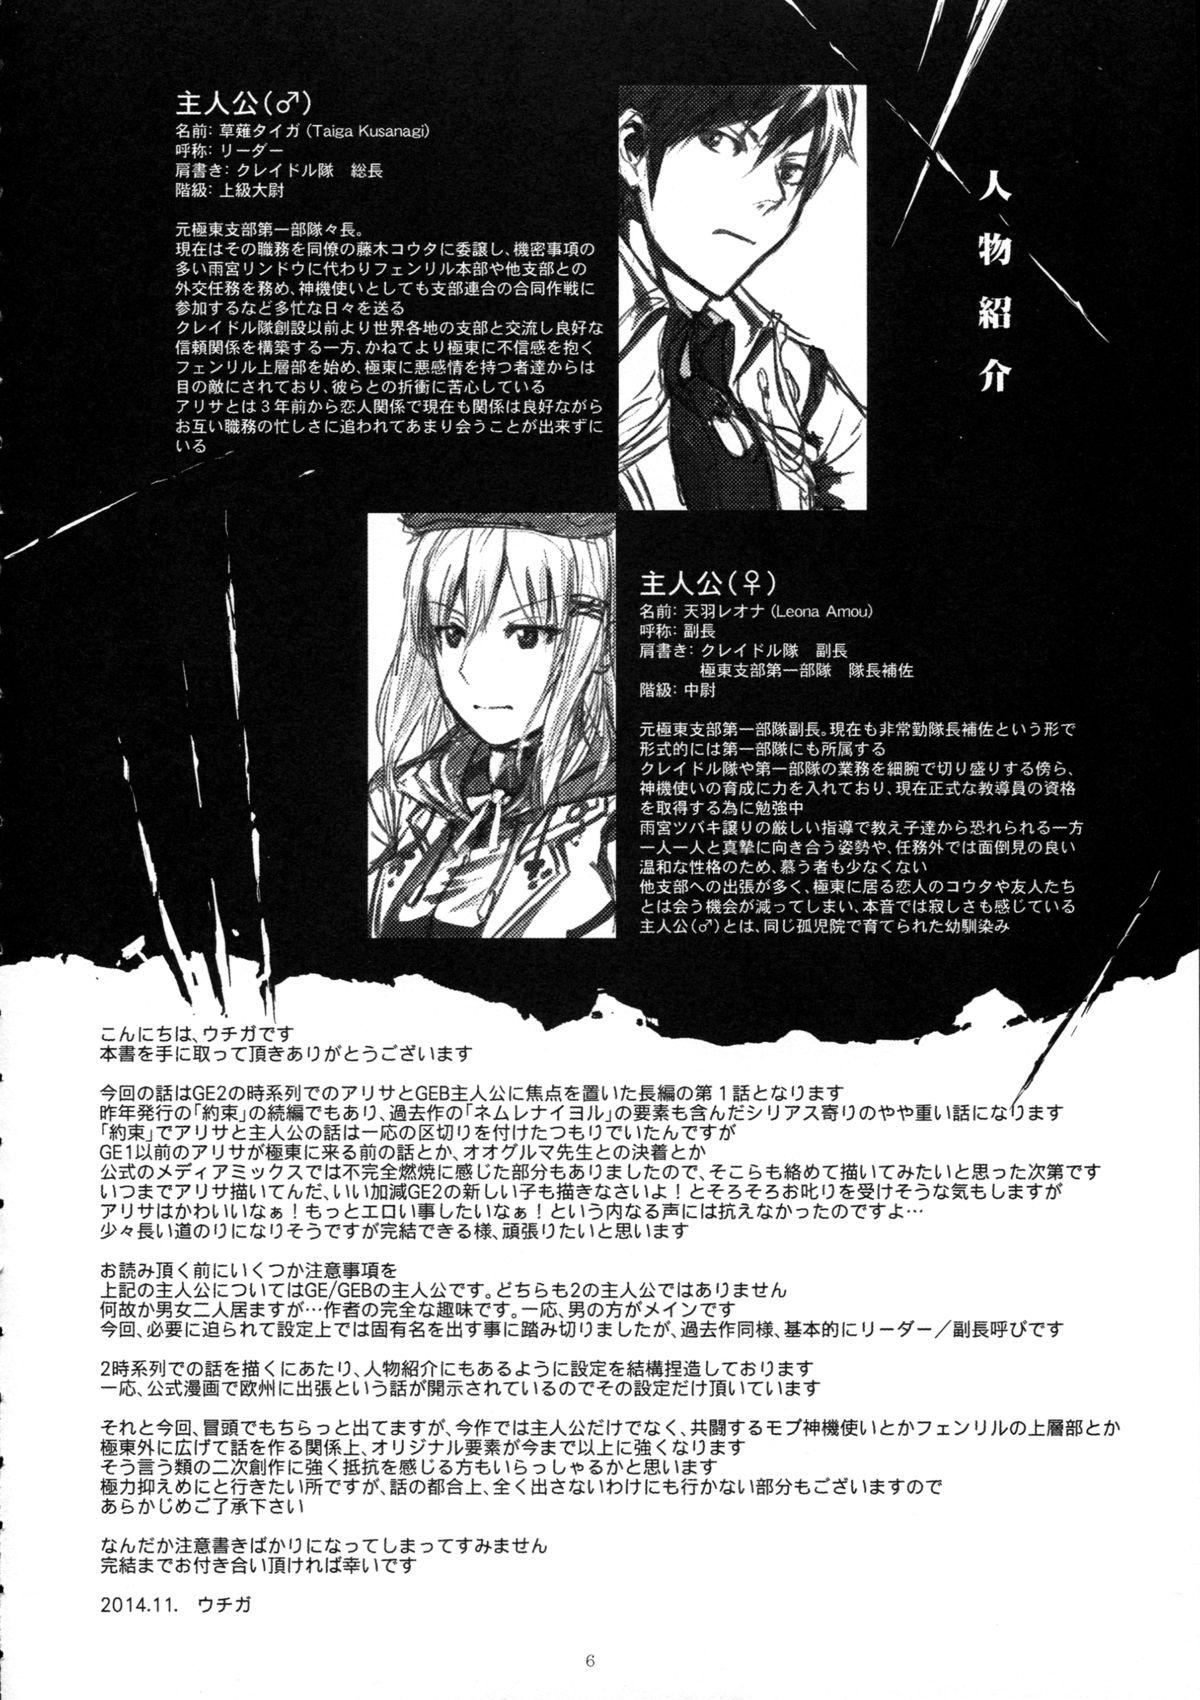 Glam Again #1 Stay With Me Till Dawn - God eater Paja - Page 6